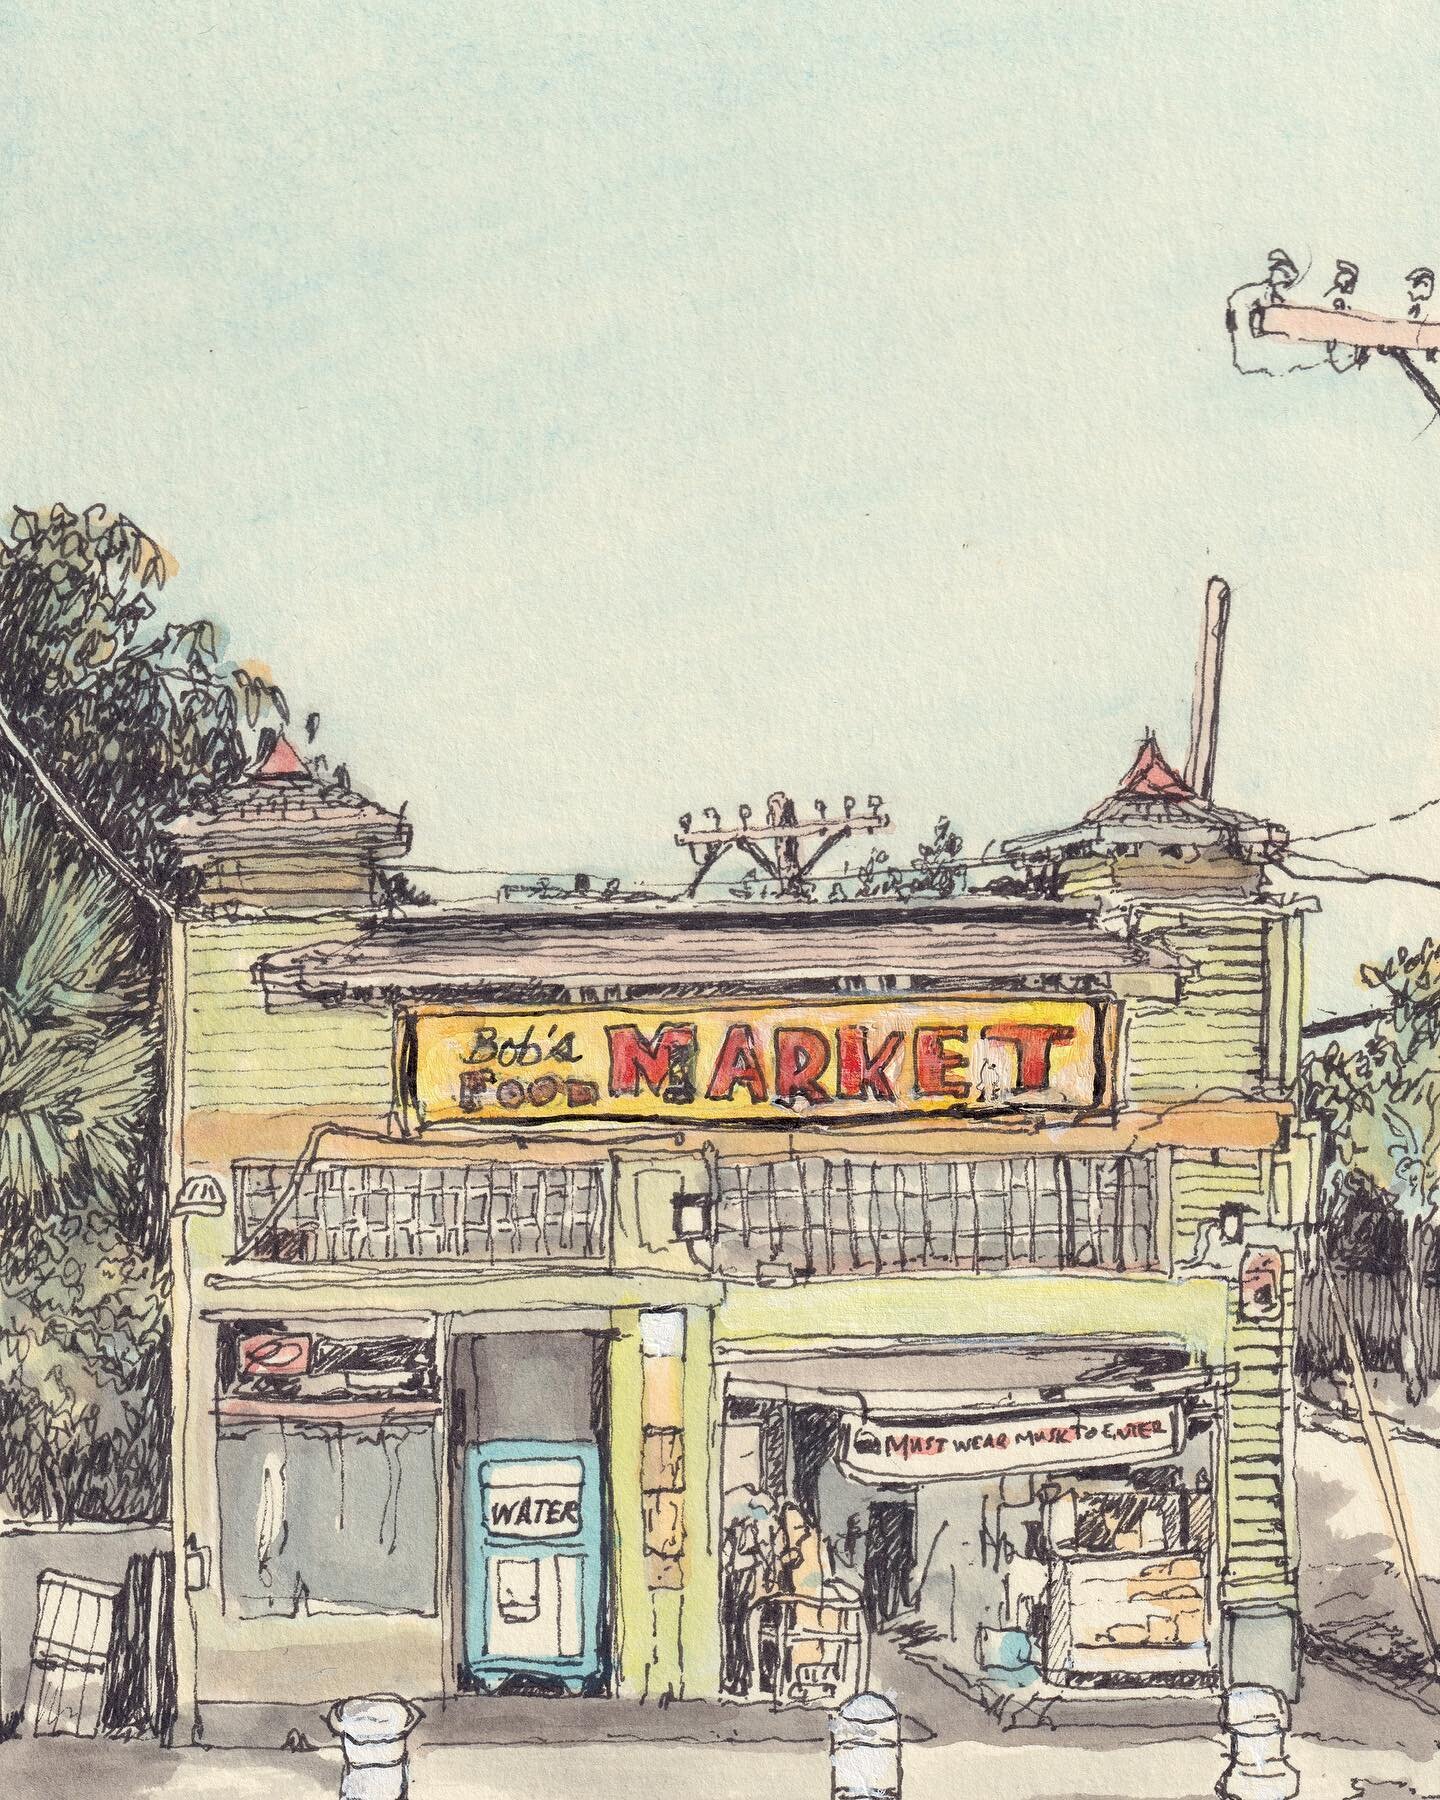 👀 Yesterday a stranger told me I looked like @jonimitchell .... while sitting on the ground... drawing this market in Echo Park. 

I spent the morning with the awesome @fmurphy - walking the city, drawing &amp; sharing stories about this awesome cit